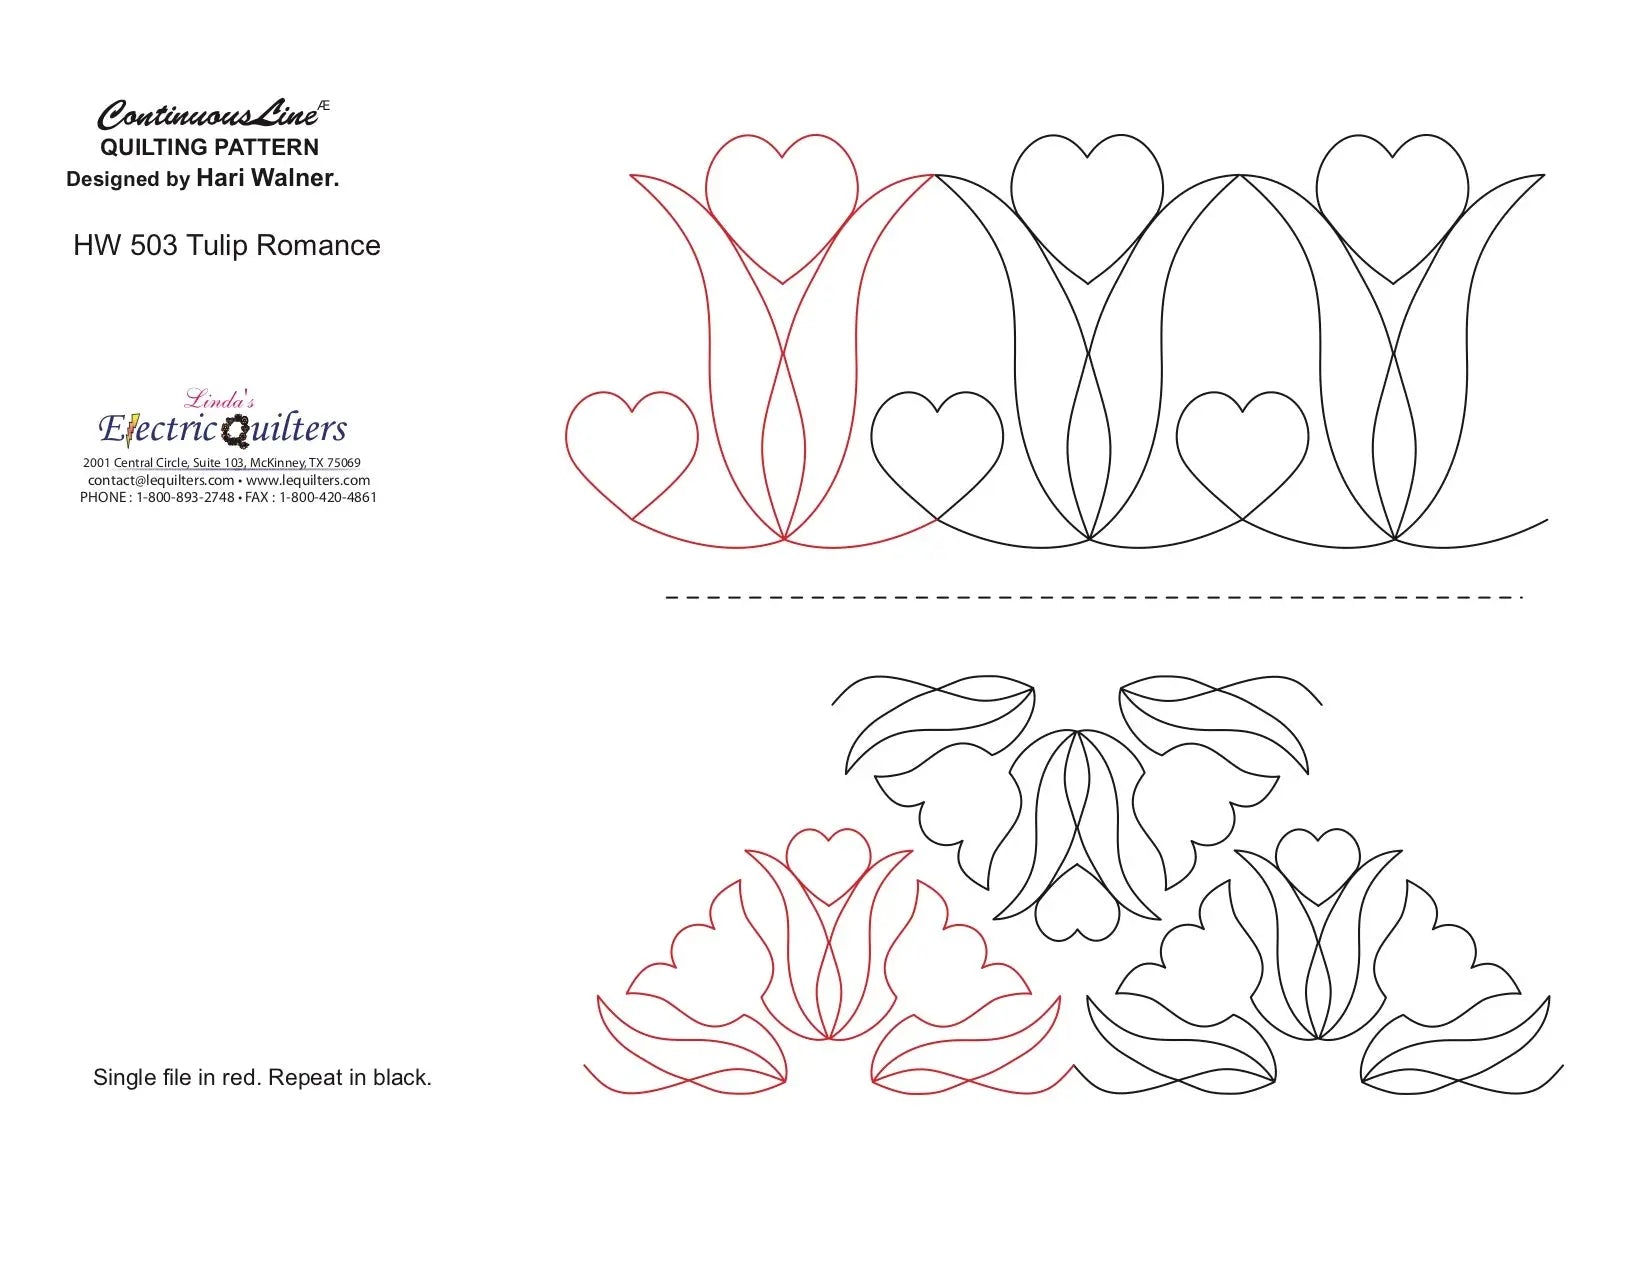 503 Tulip Romance Pantograph by Hari Walner - Linda's Electric Quilters